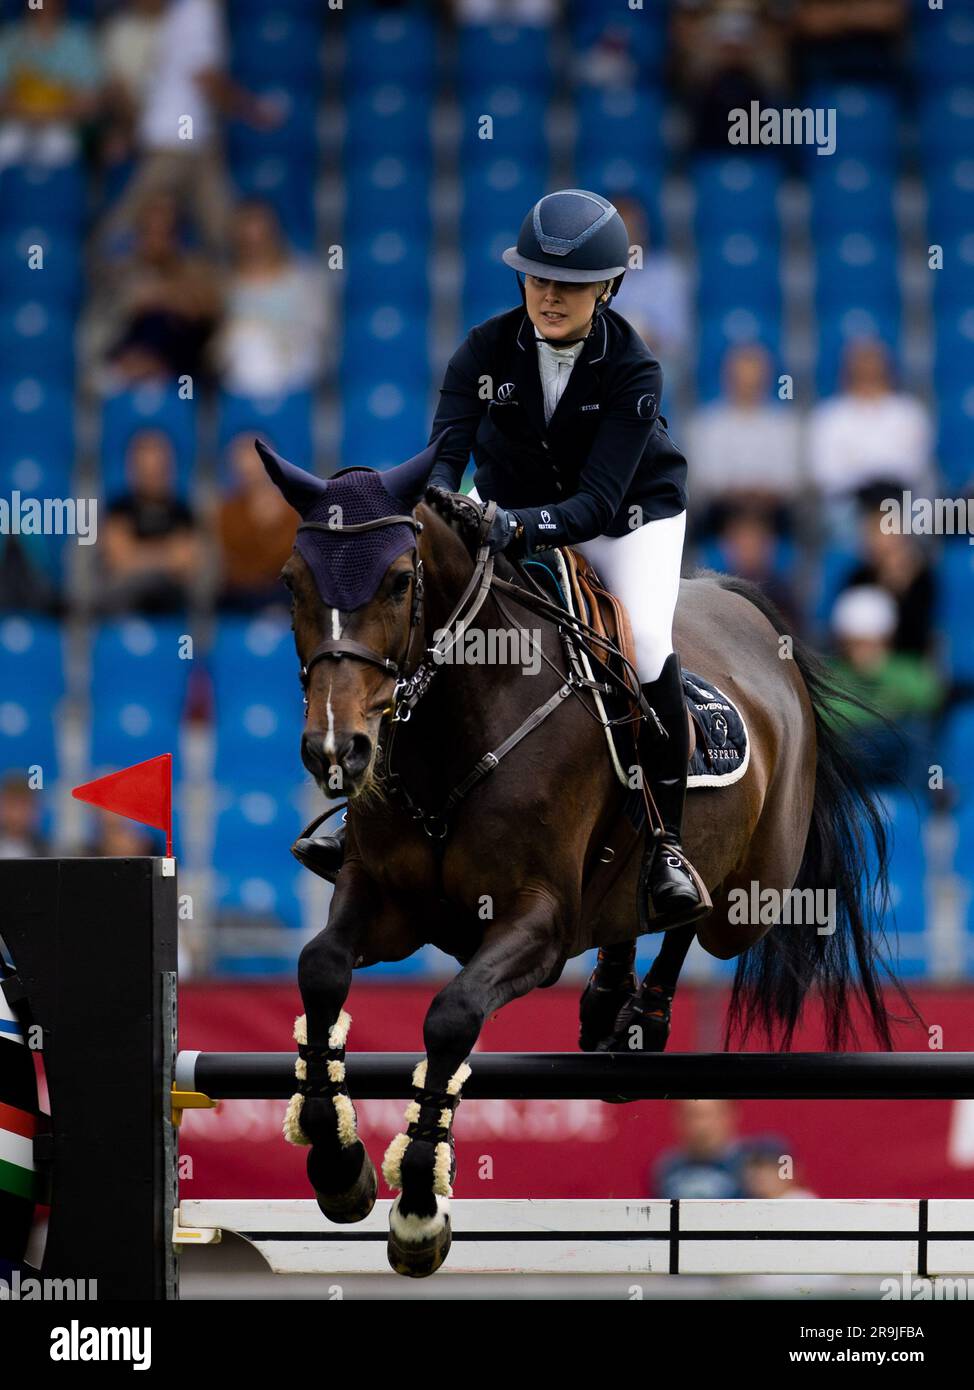 Aachen, Germany. 27th June, 2023. Equestrian sport, jumping: CHIO, Opening Jumping. Rider Evelina Tovek from Sweden on the horse 'Cortina' rides through the course. She won the competition. Credit: Rolf Vennenbernd/dpa/Alamy Live News Stock Photo